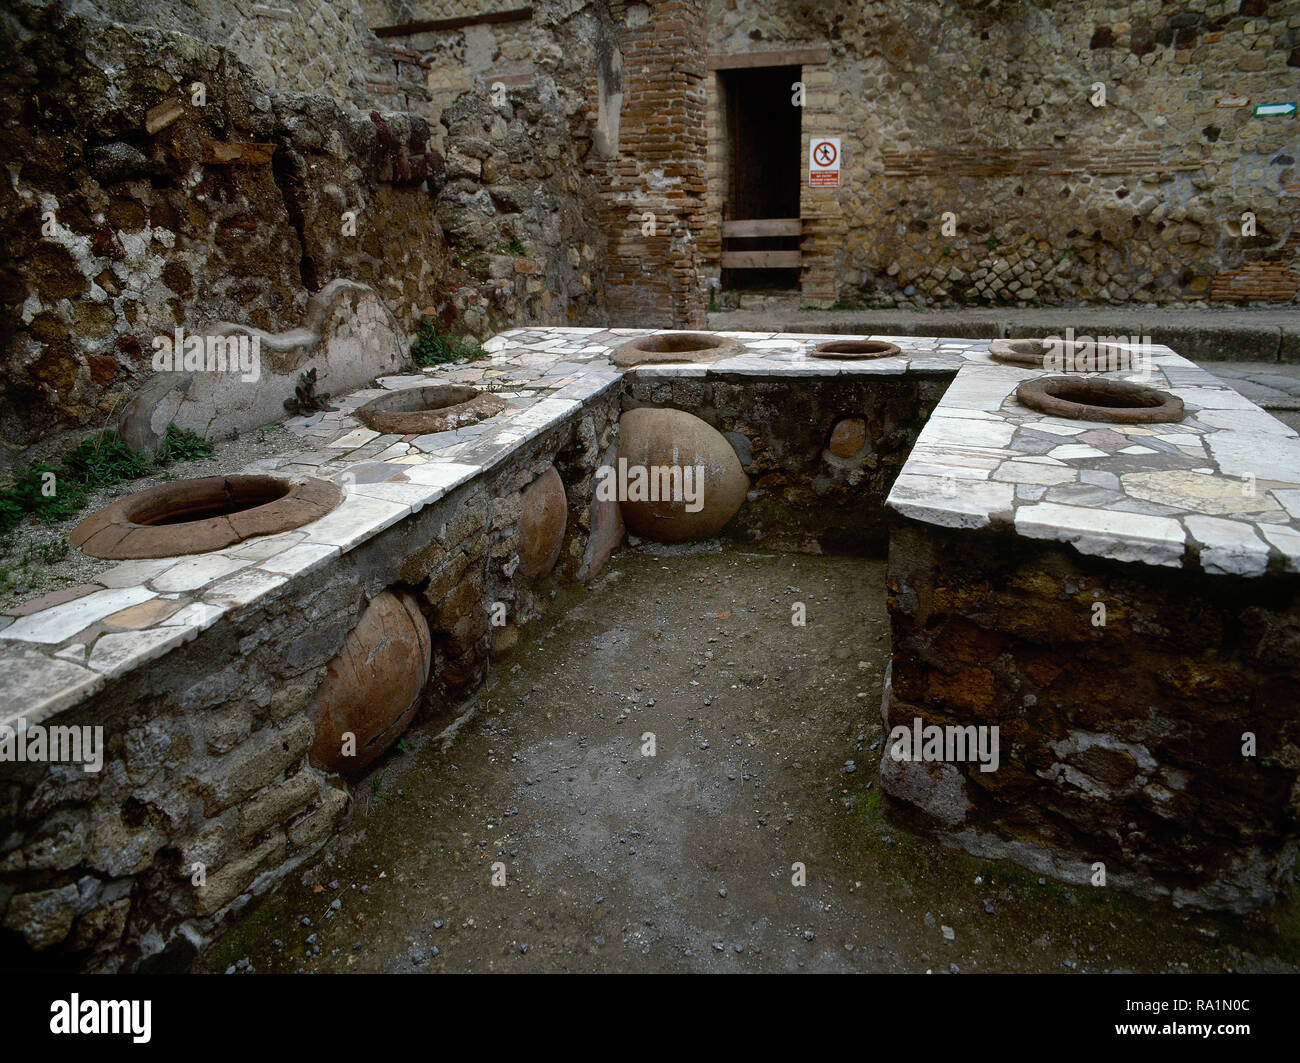 Italy. Herculaneum. Ancient Roman city destroyed by the eruption of the Vesuvius in 79 AD. Bar counter with holes, where jars were set into them (dolia) for food or wine. Campania. Stock Photo